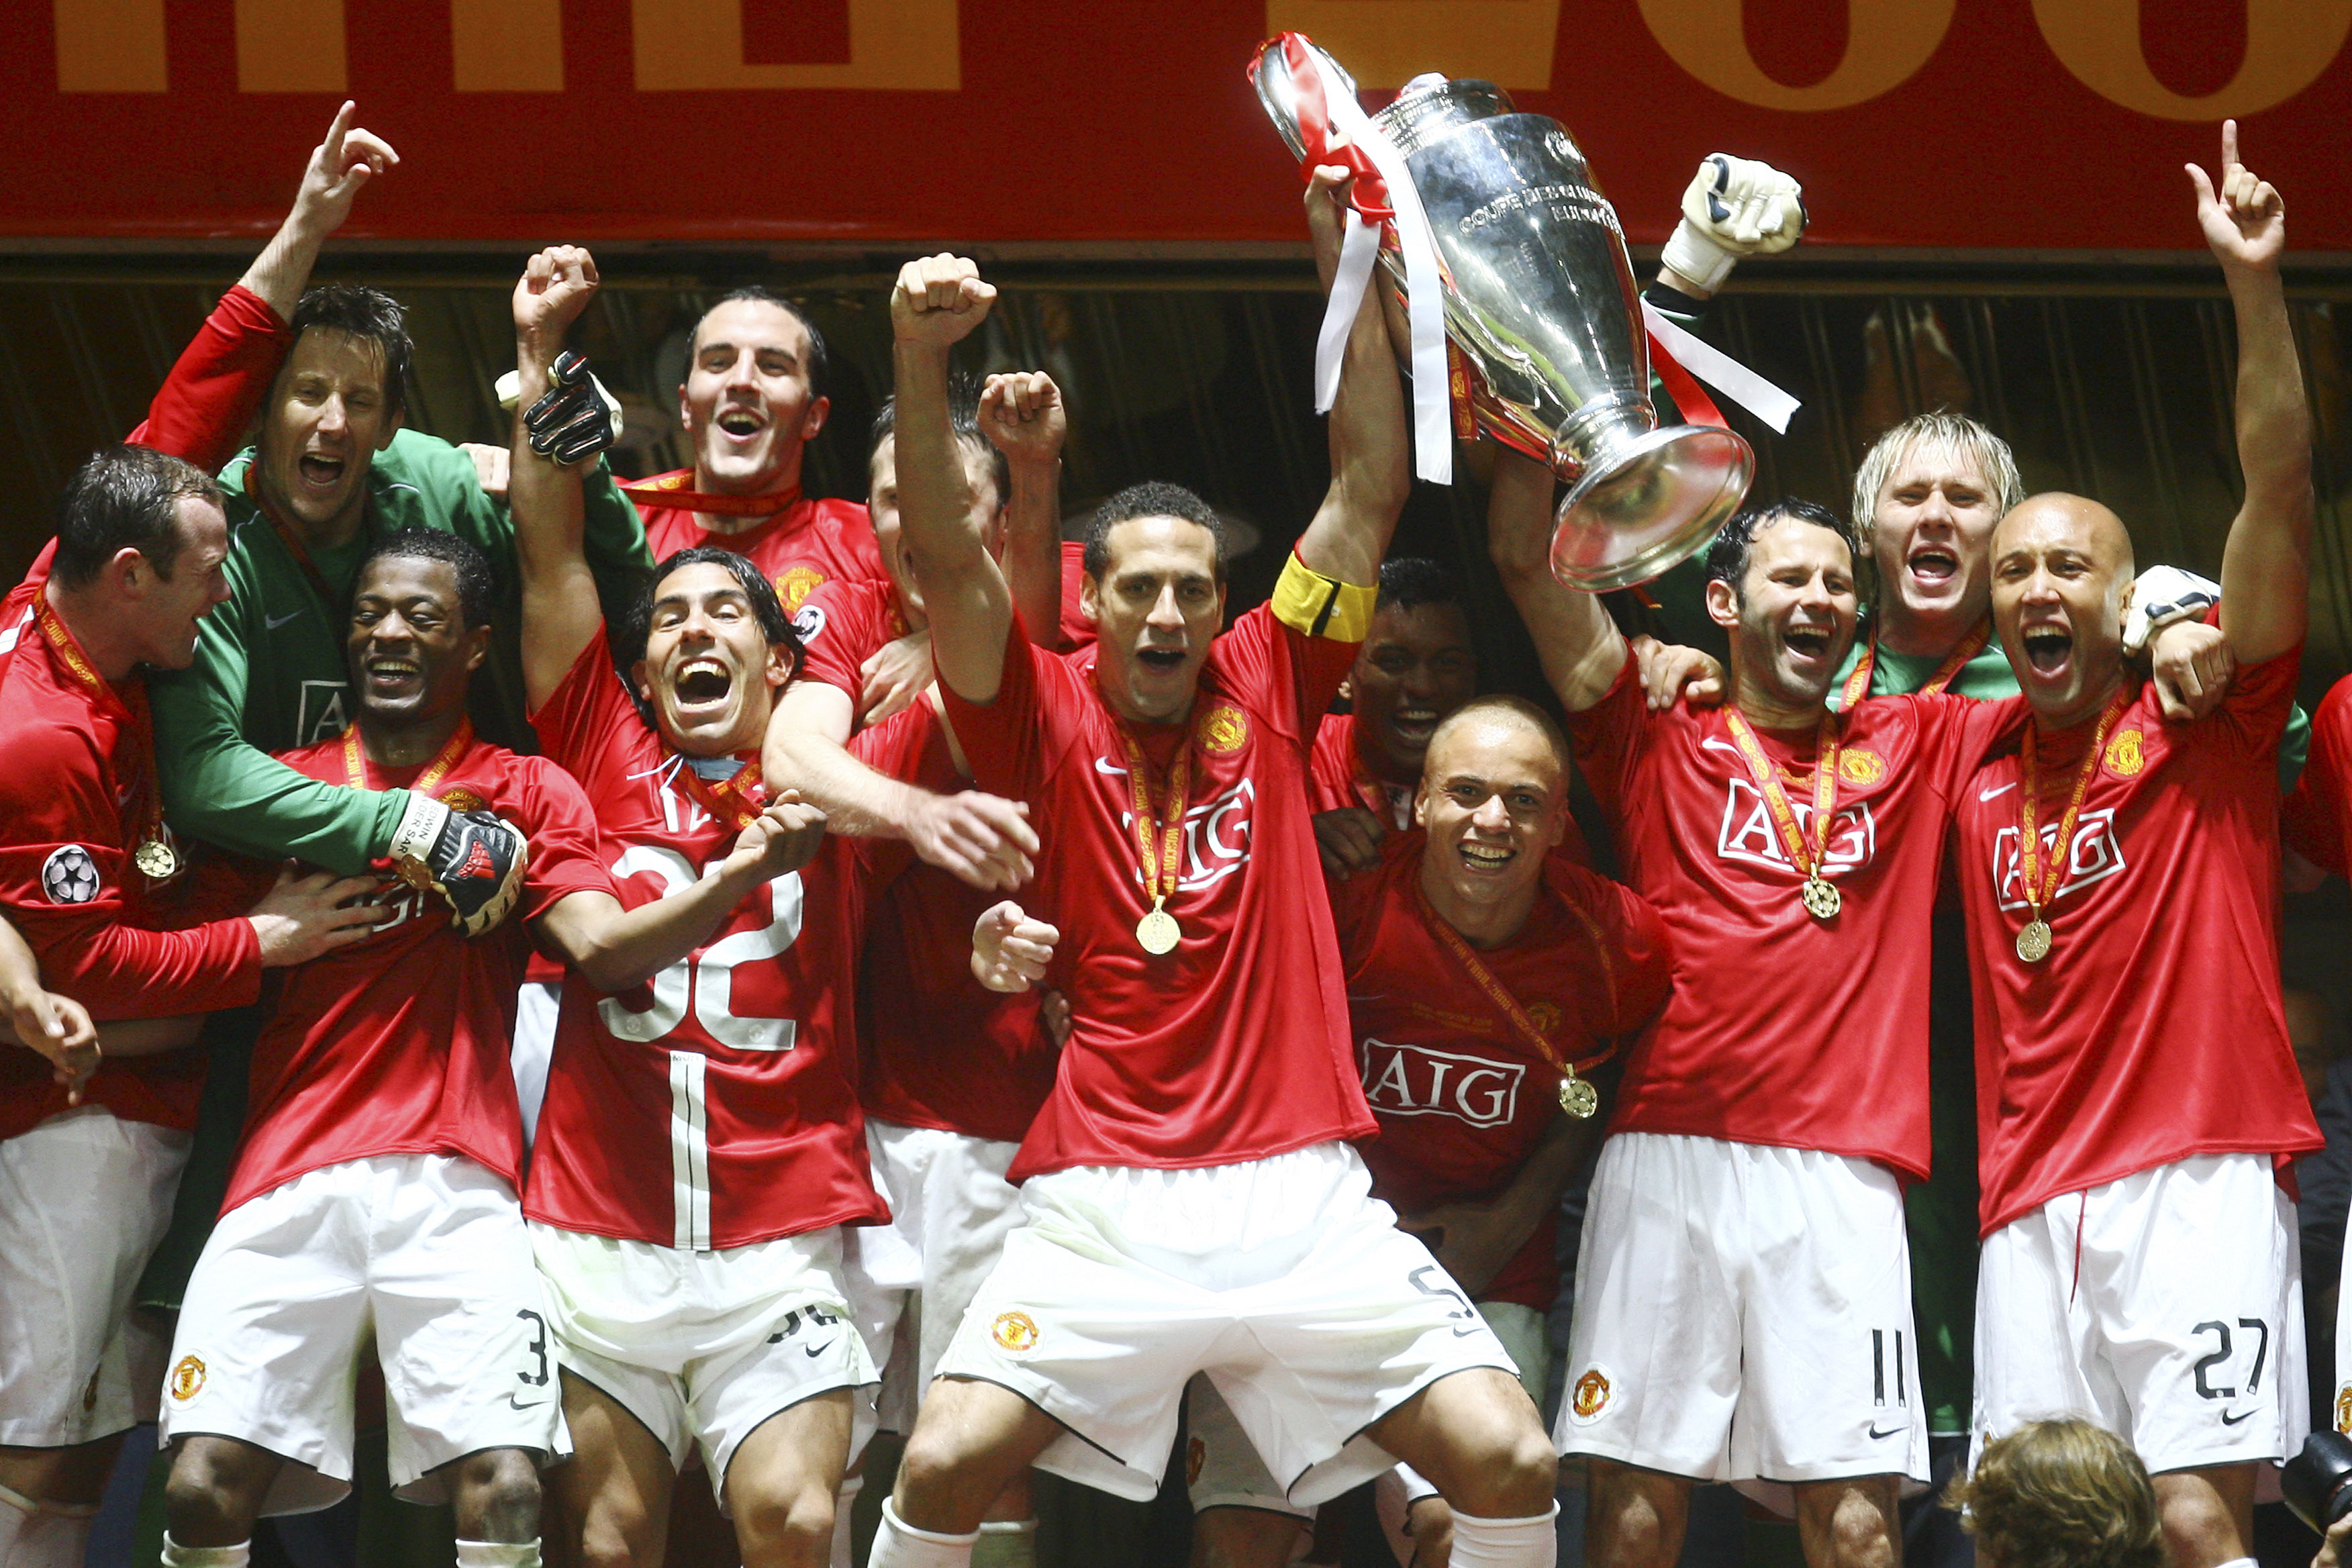 MOSCOW - MAY 21: Manchester United players celebrate with the trophy following their team's victory during the UEFA Champions League Final match between Manchester United and Chelsea at the Luzhniki Stadium on May 21, 2008 in Moscow, Russia. (Photo by Jul